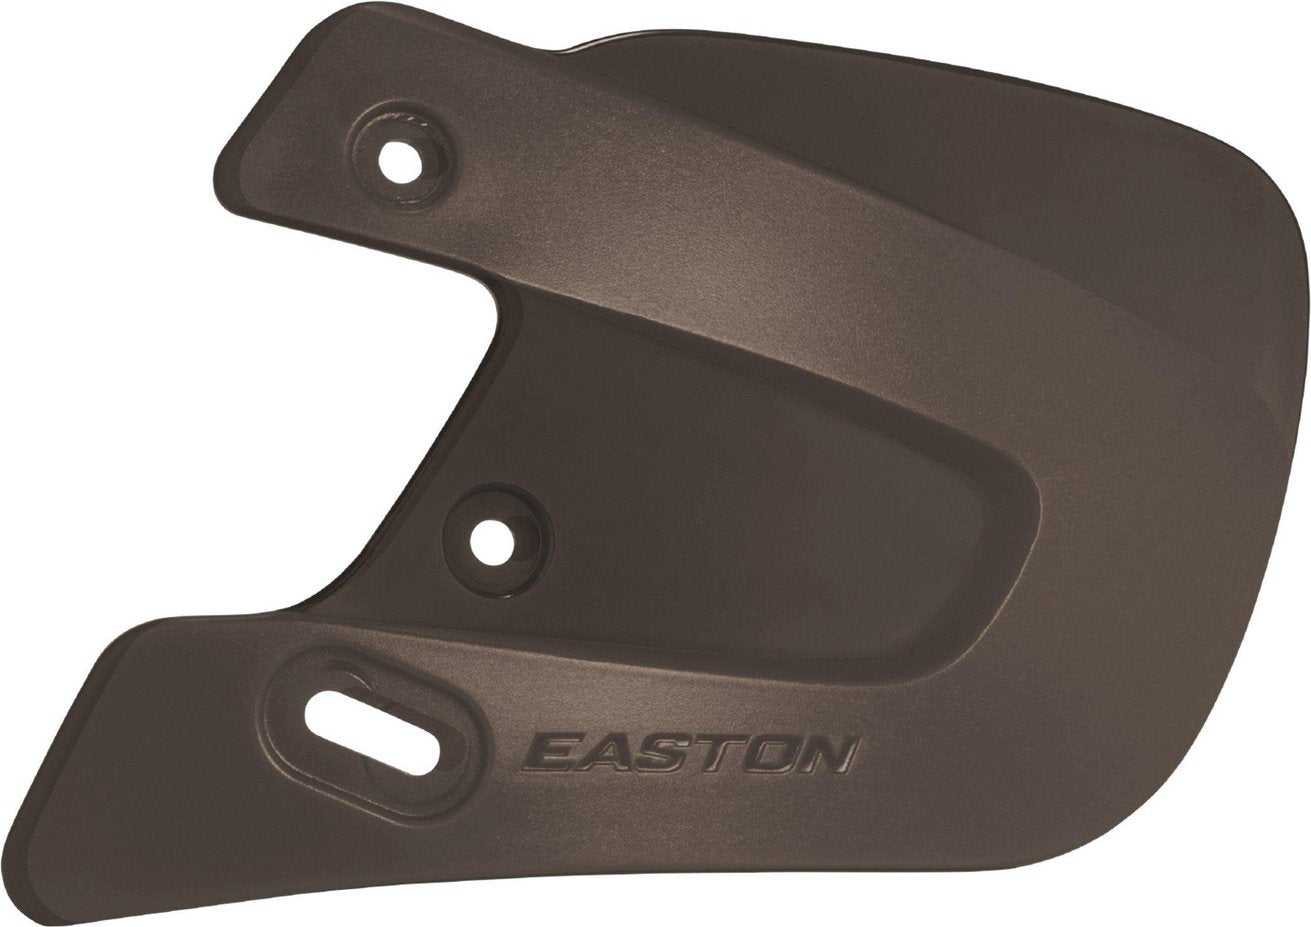 Easton Helmet Extended Jaw Guard - Brown - HIT a Double